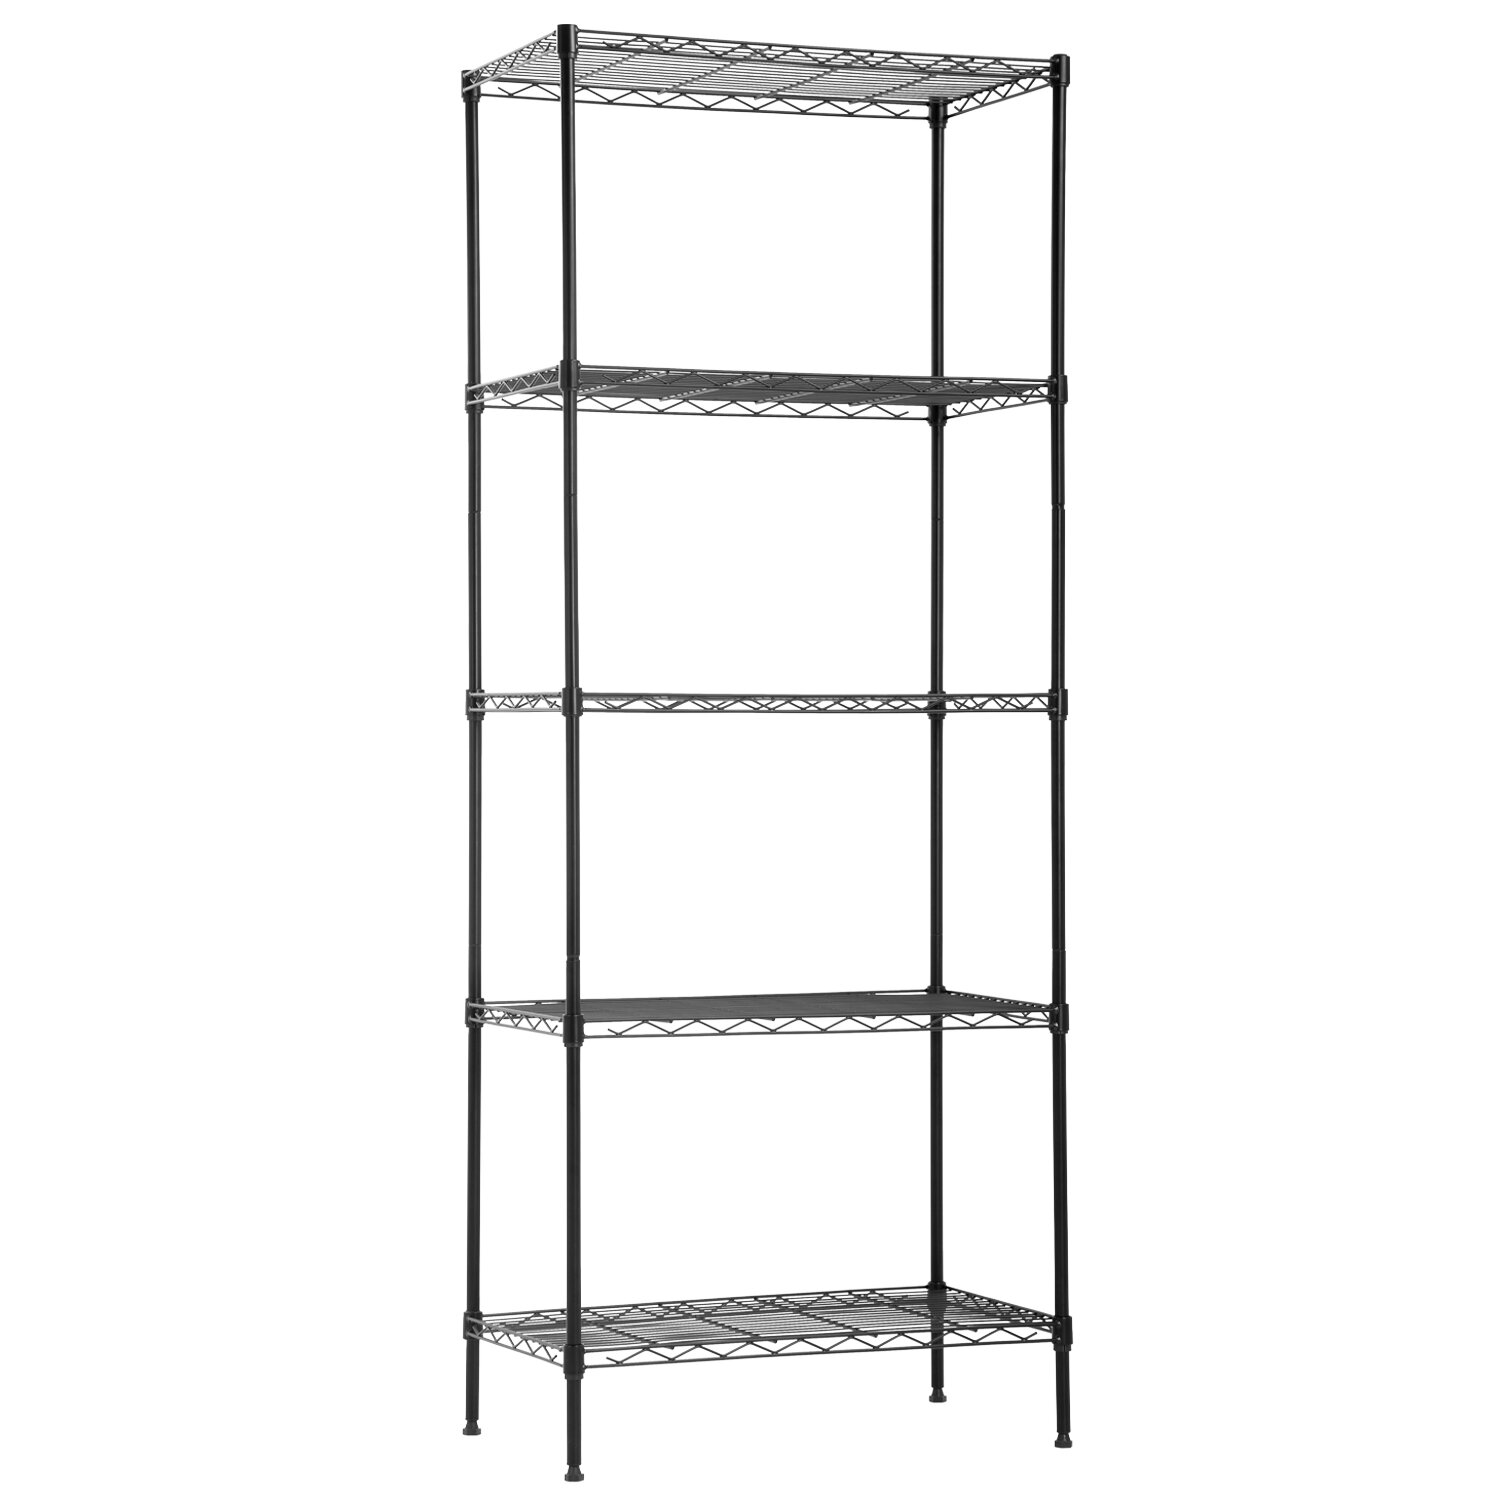 MelysEU Standing Shelf Units Multi-functional Double Layers Hollow Out Stand Rack Storage Shelves